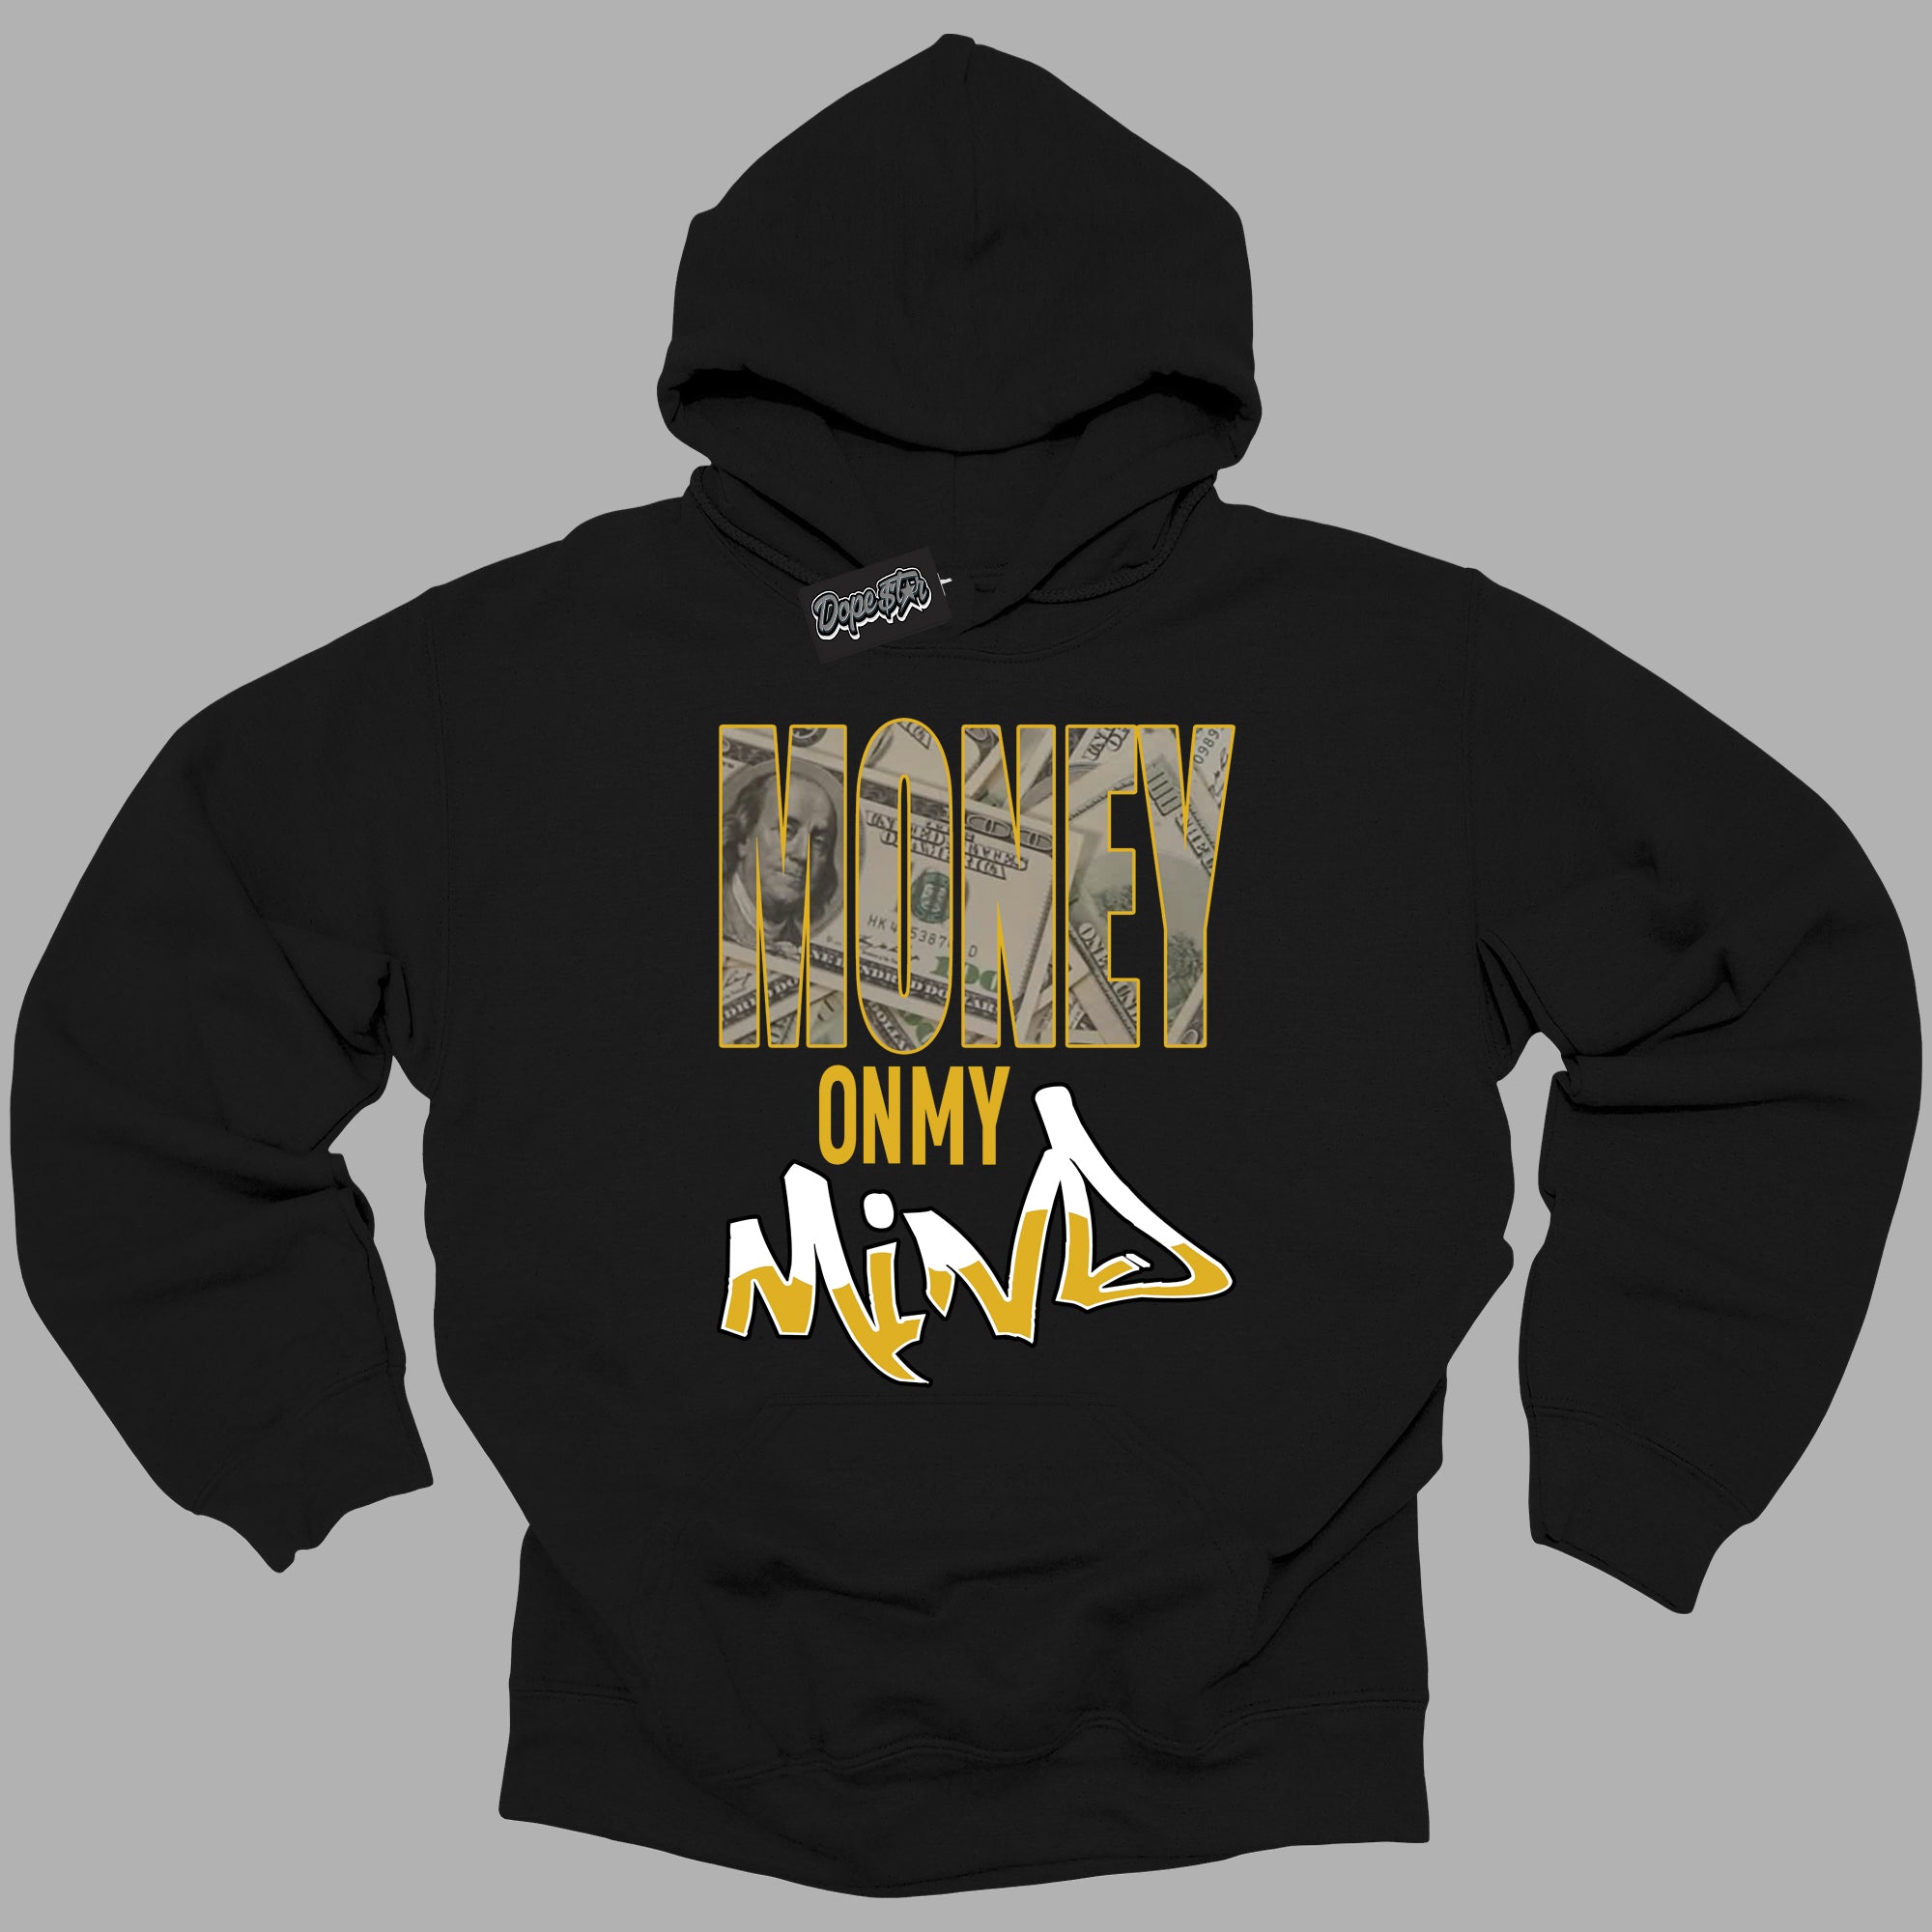 Cool Black Hoodie with “ Money On My Mind ”  design that Perfectly Matches Yellow Ochre 6s Sneakers.